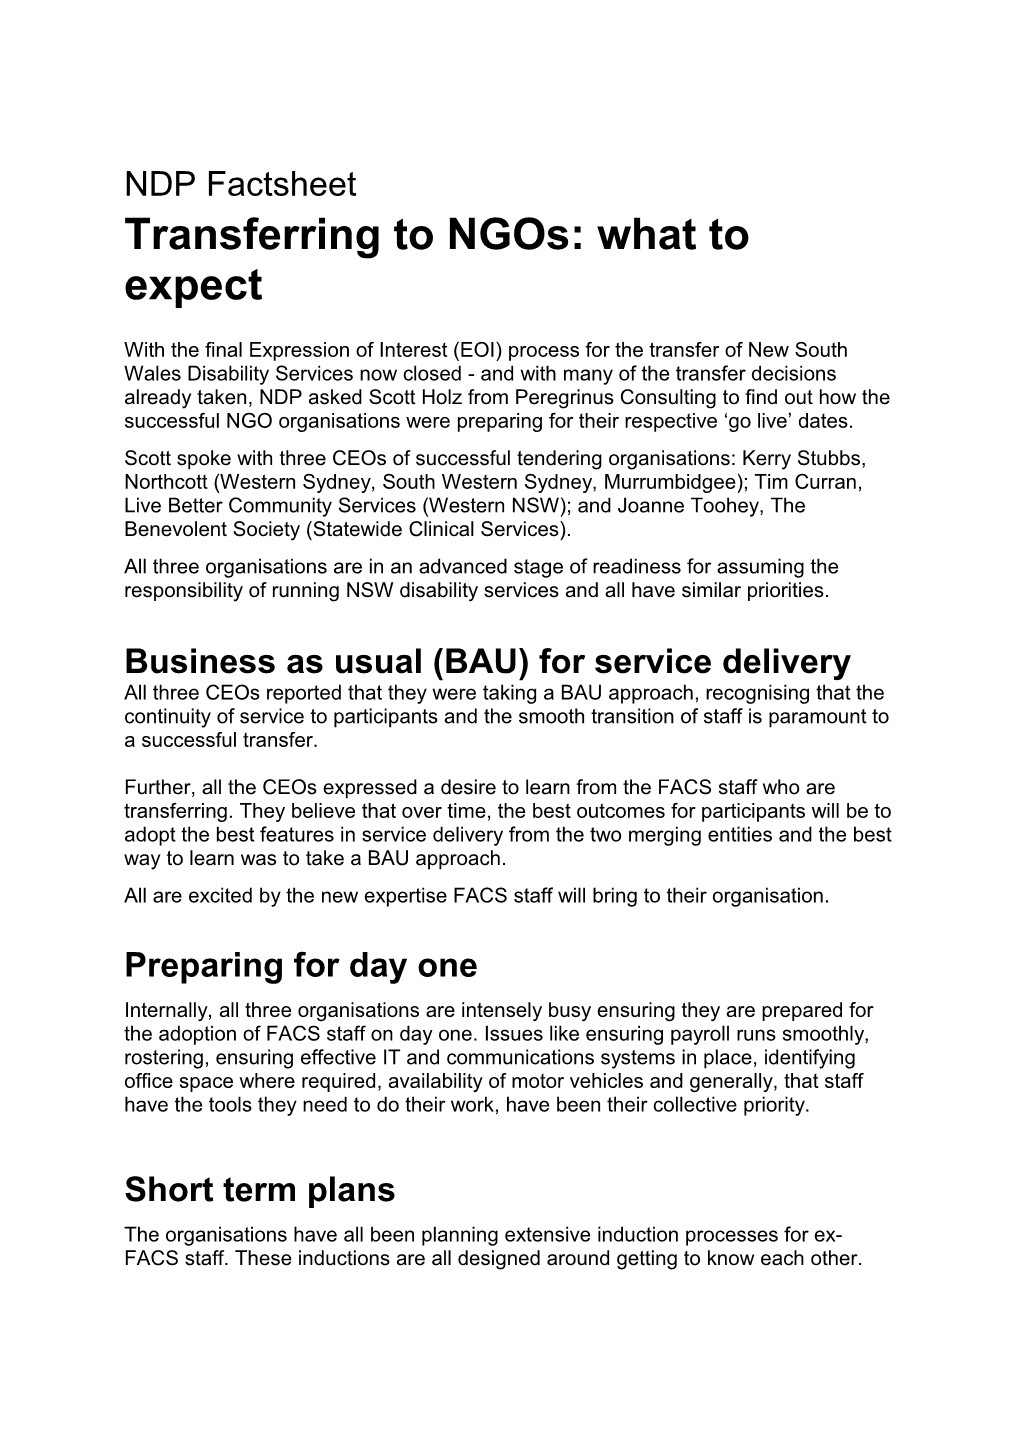 Transferring to Ngos: What to Expect